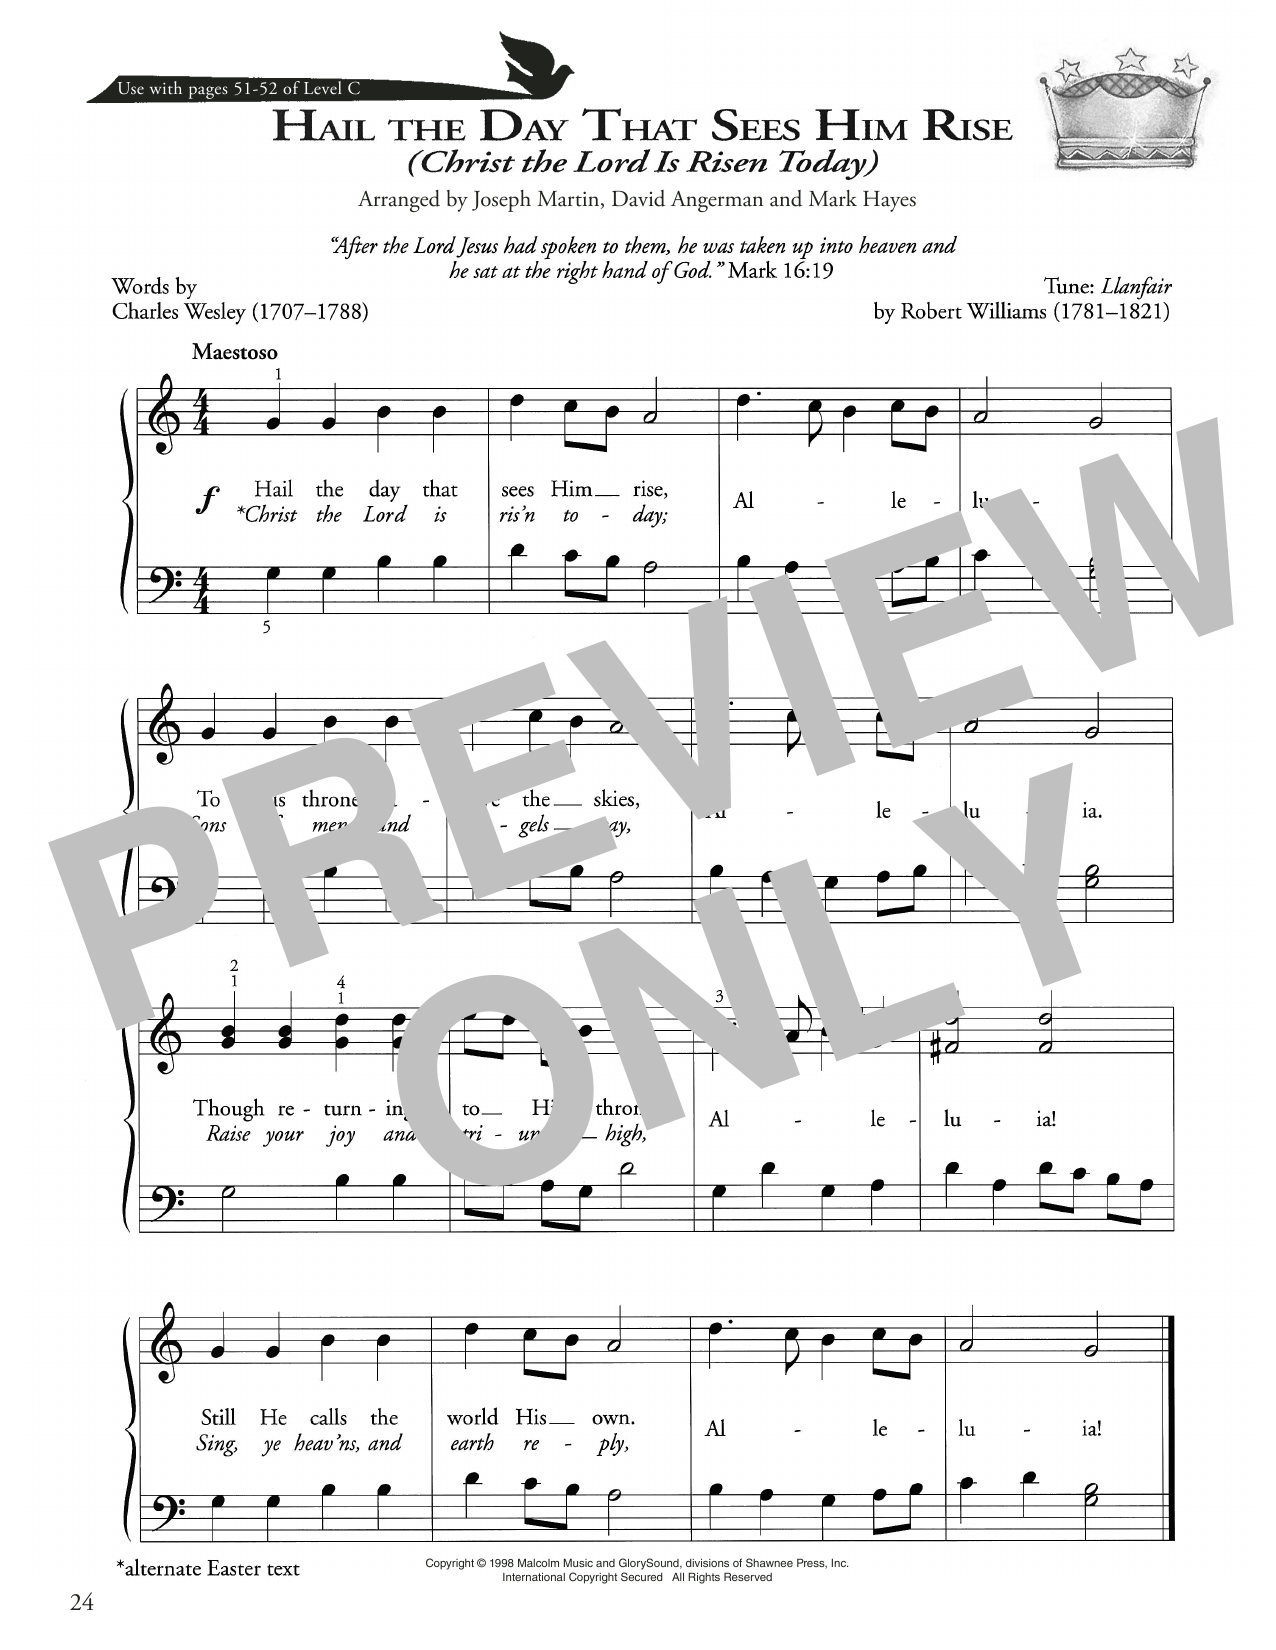 Download Joseph Martin, David Angerman and Ma Hail The Day That Sees Him Rise Sheet Music